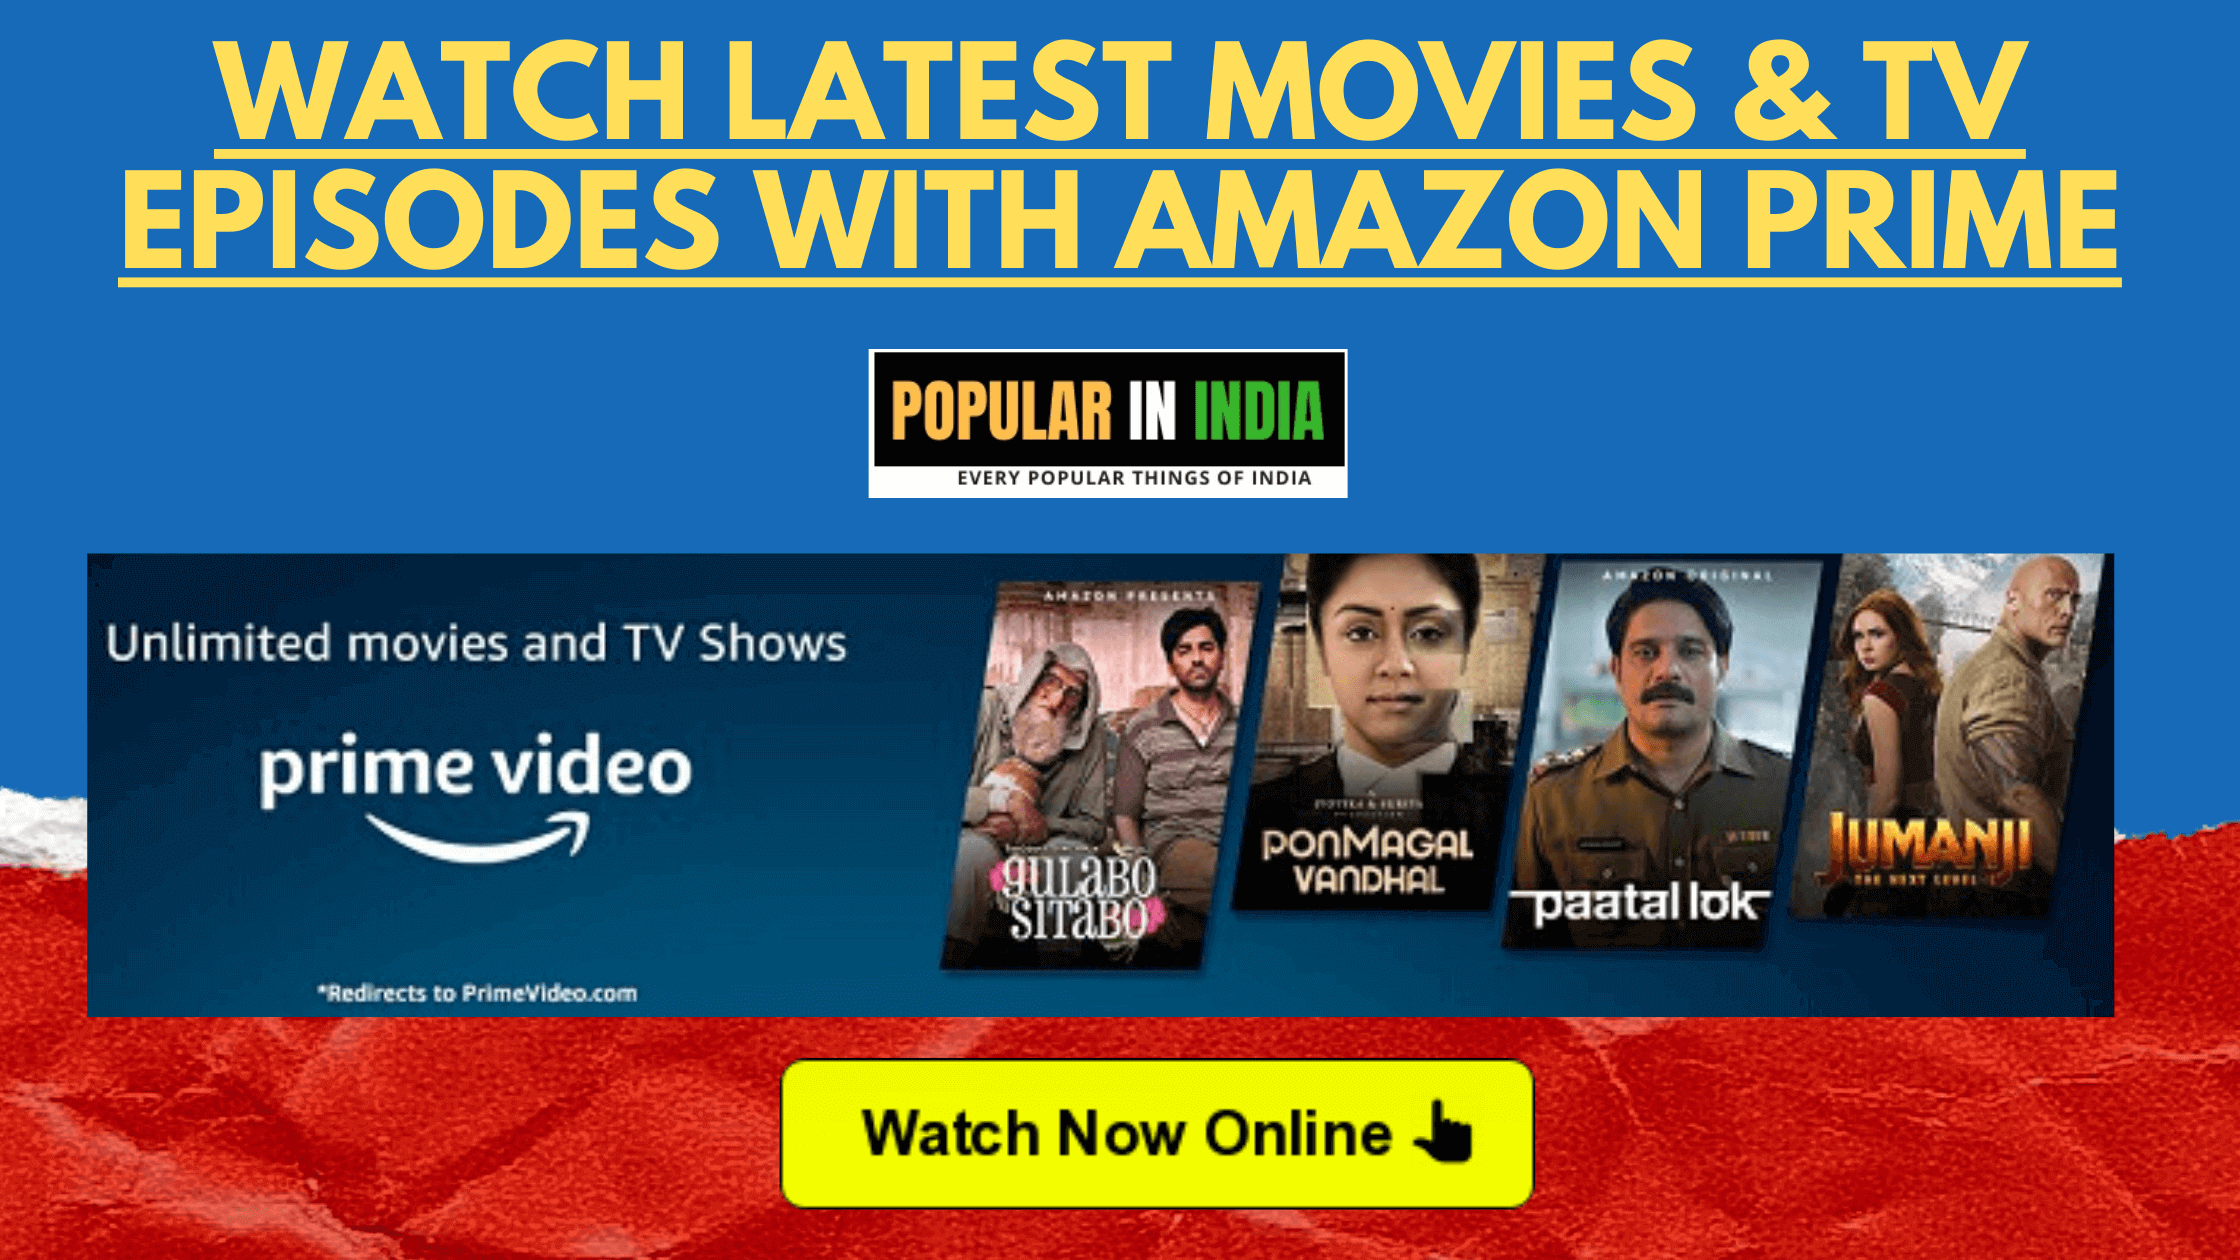 Unlimited Movies and TV Shows on Amazon Prime Video popular in India